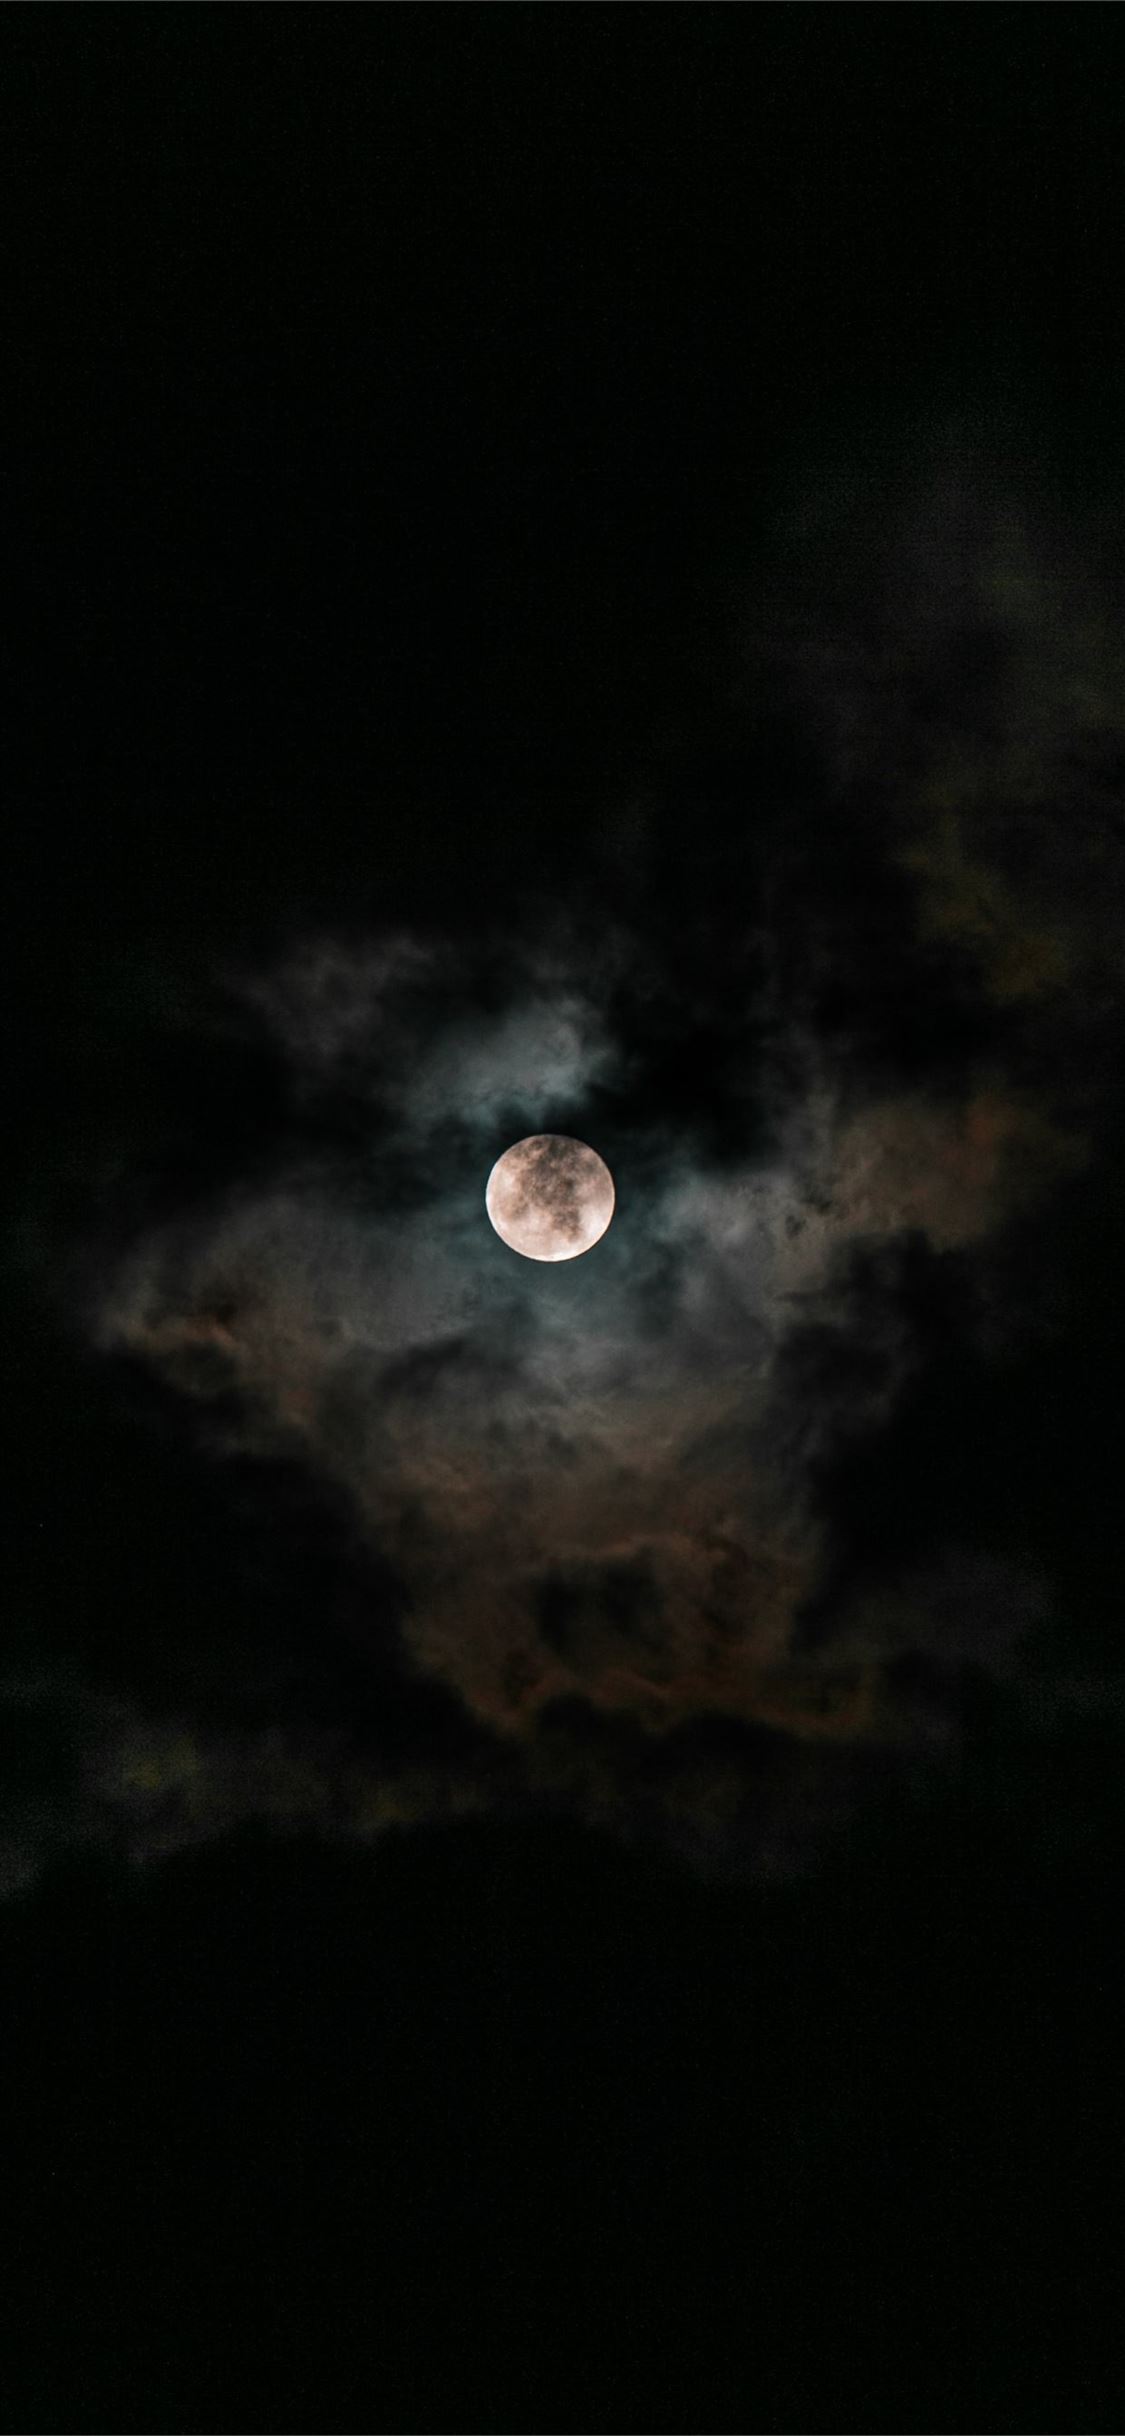 moon covered with clouds at nighttime iPhone 11 Wallpaper Free Download